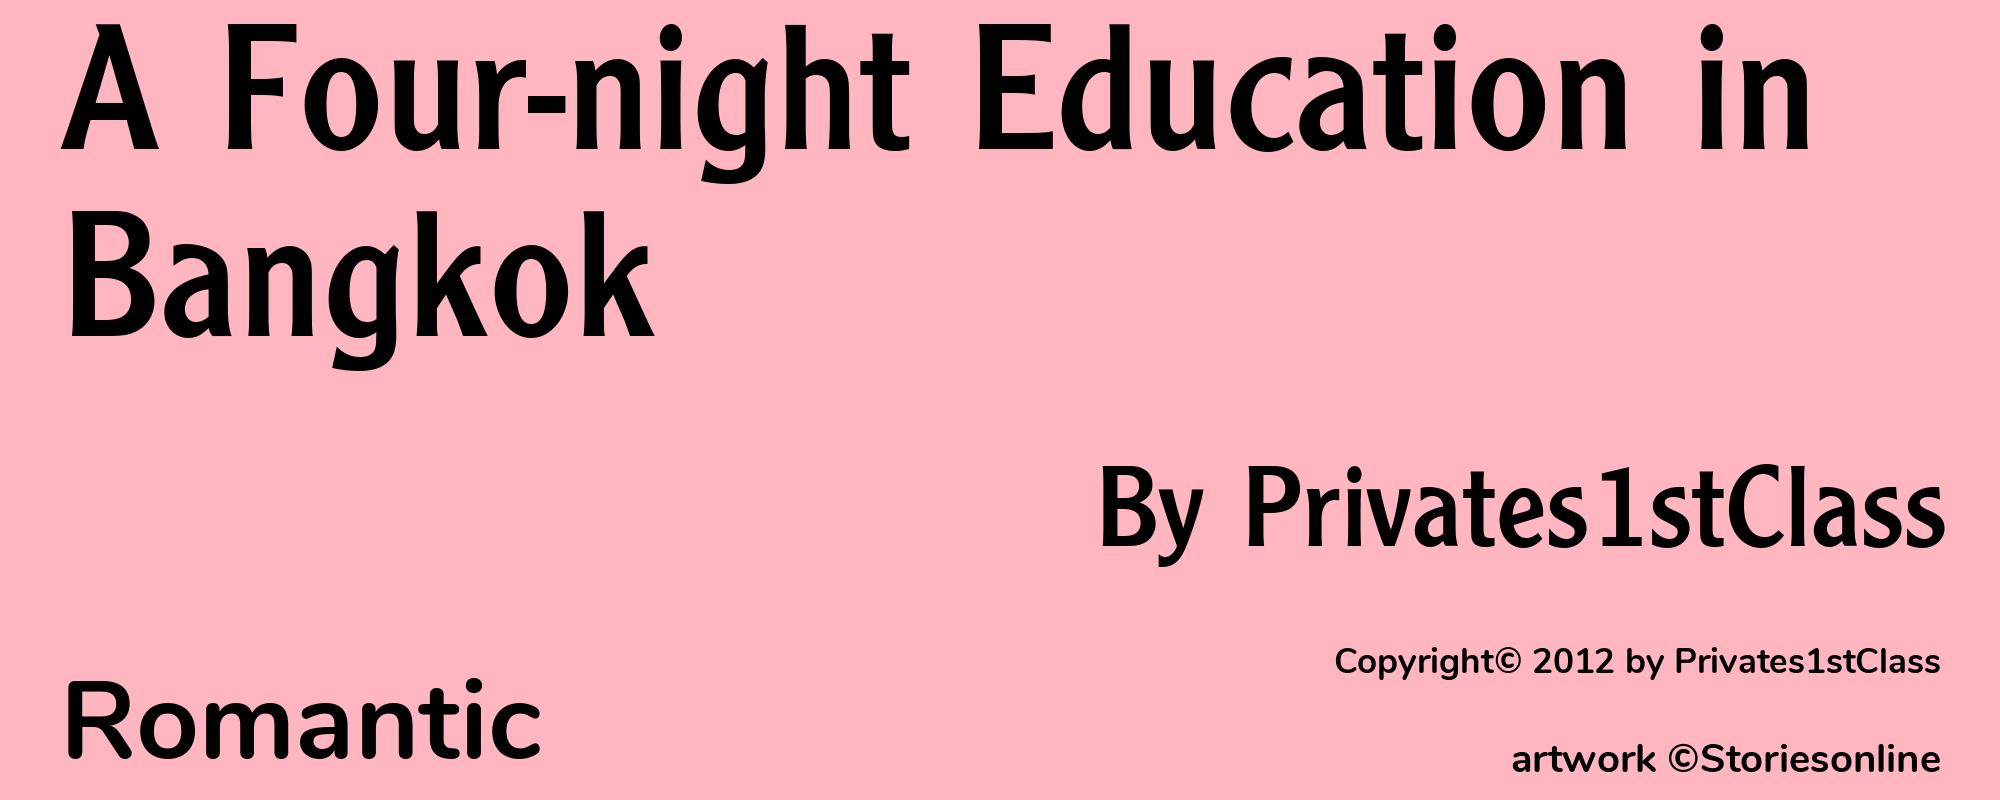 A Four-night Education in Bangkok - Cover